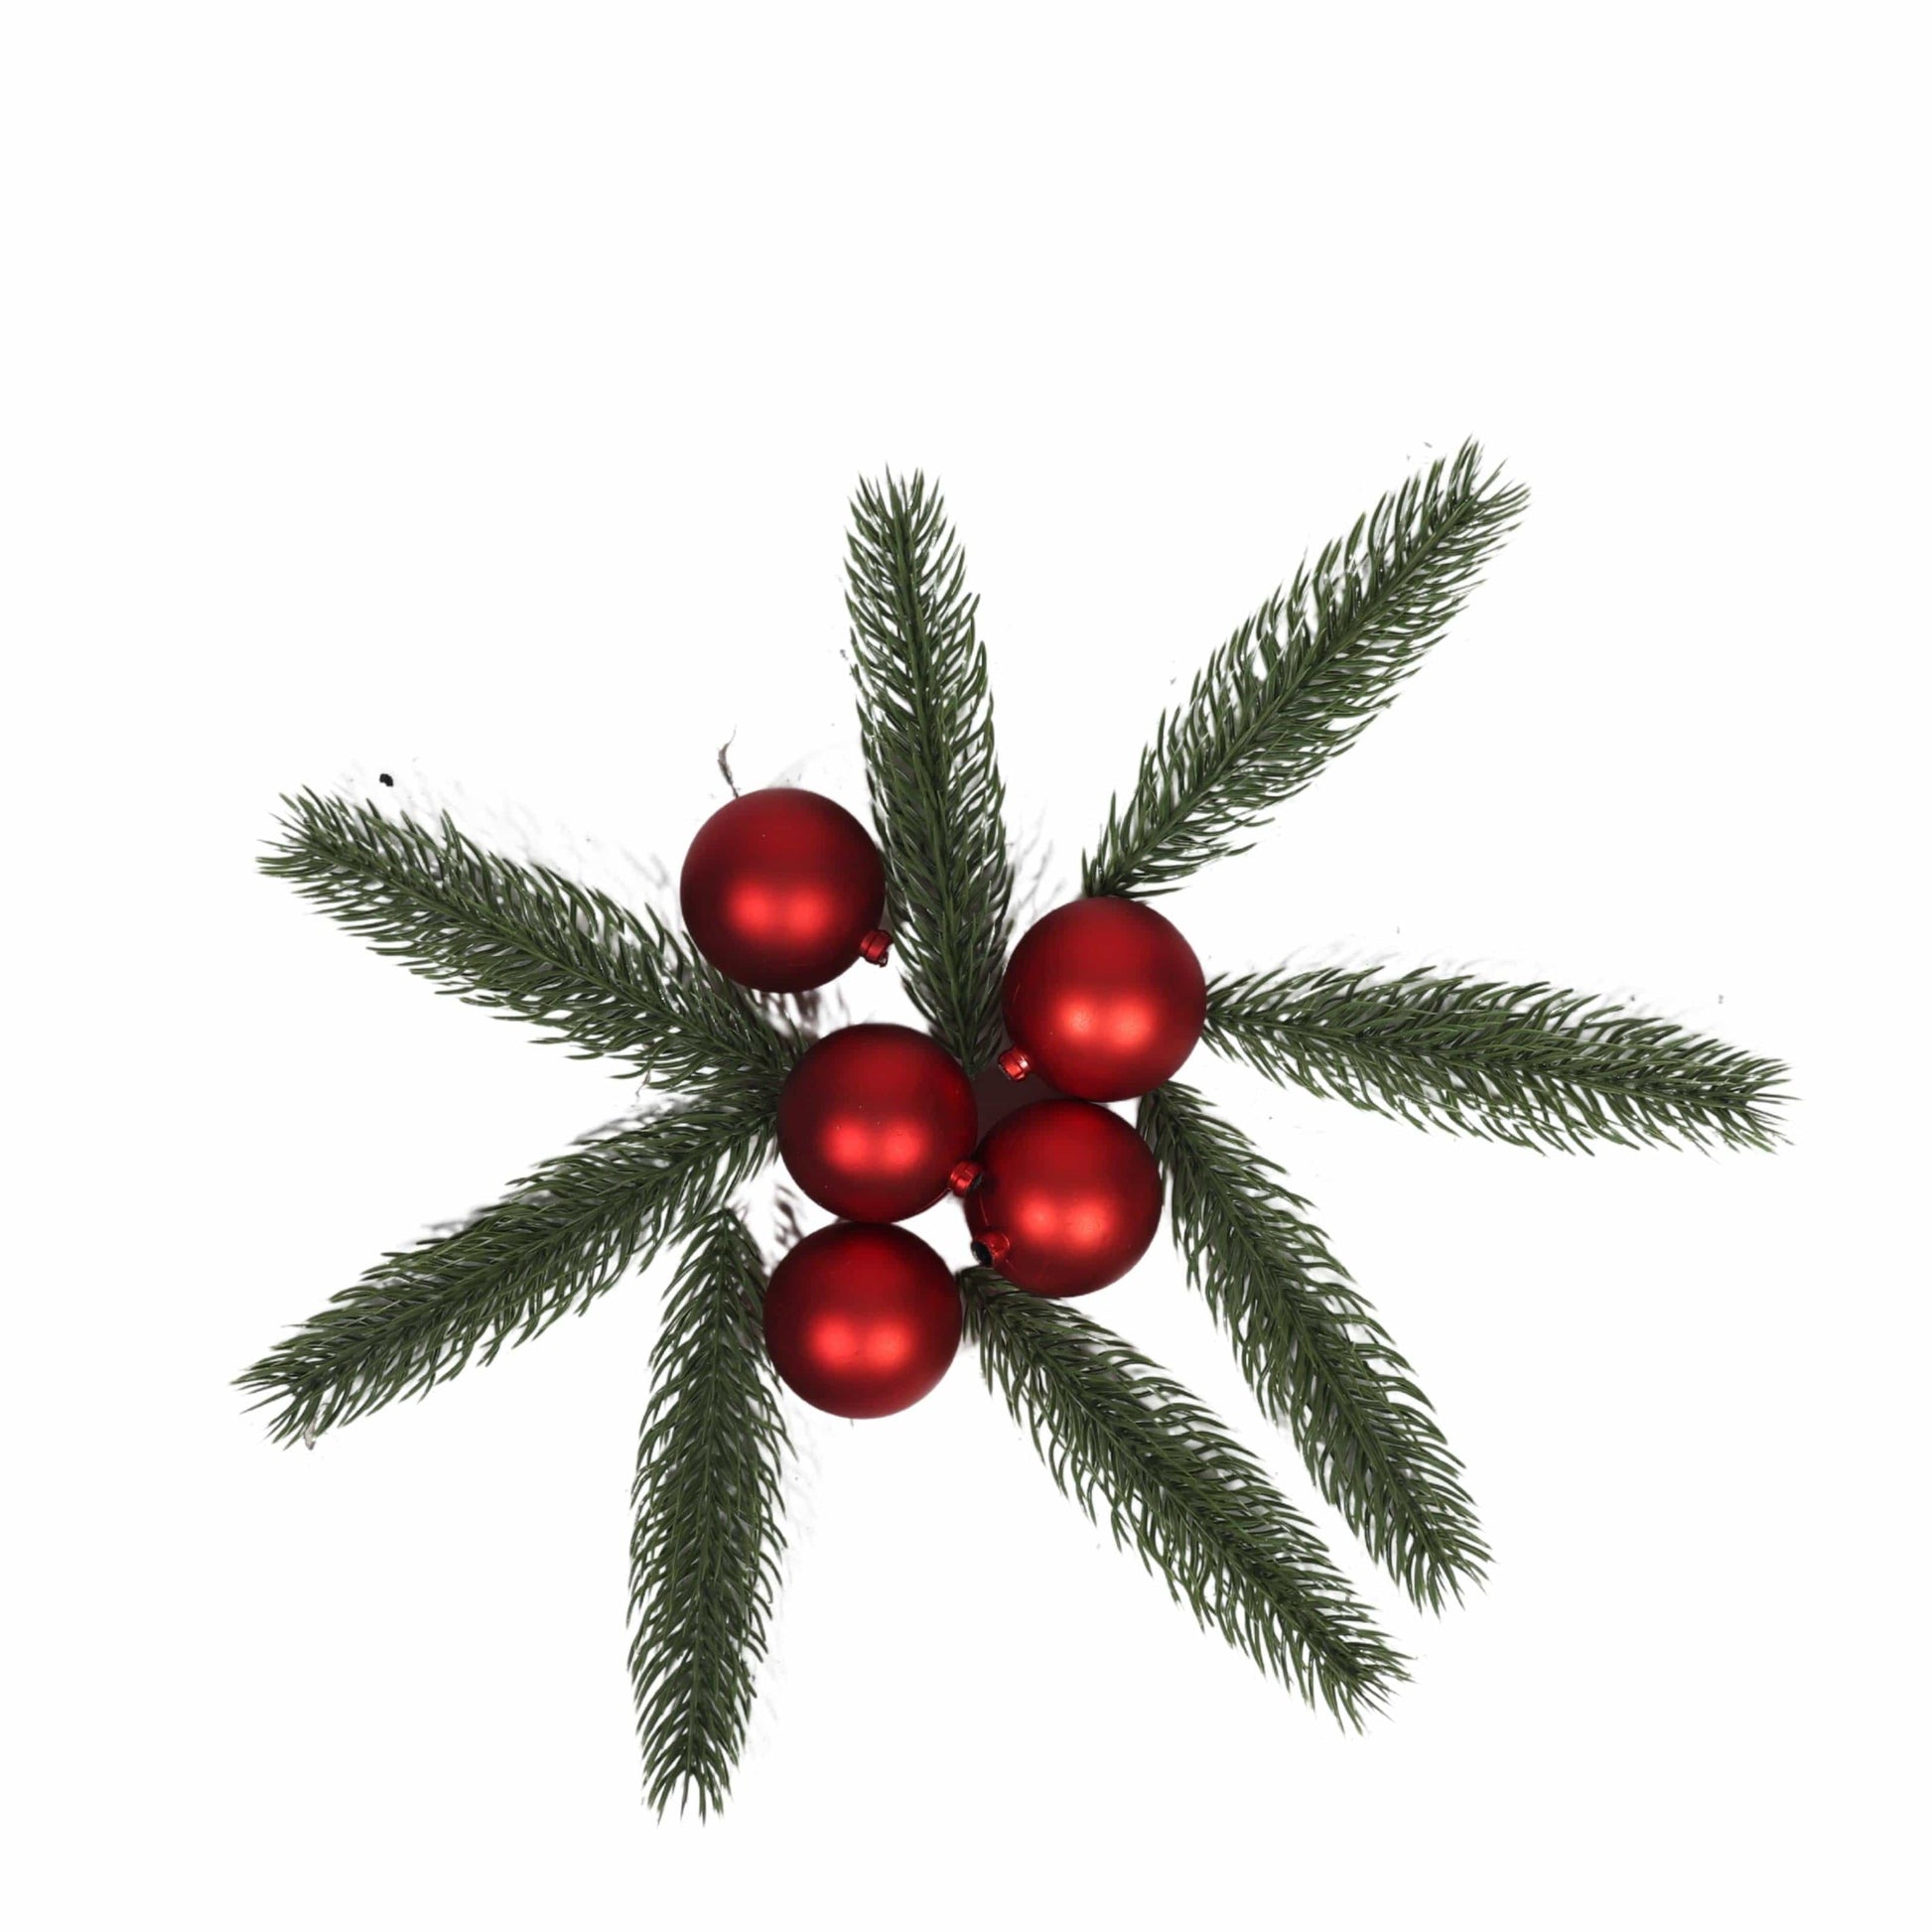 GREENERY FILL Christmas Decoration Multi-Color GREENERY FILL - 13 Pieces Greens And Balls